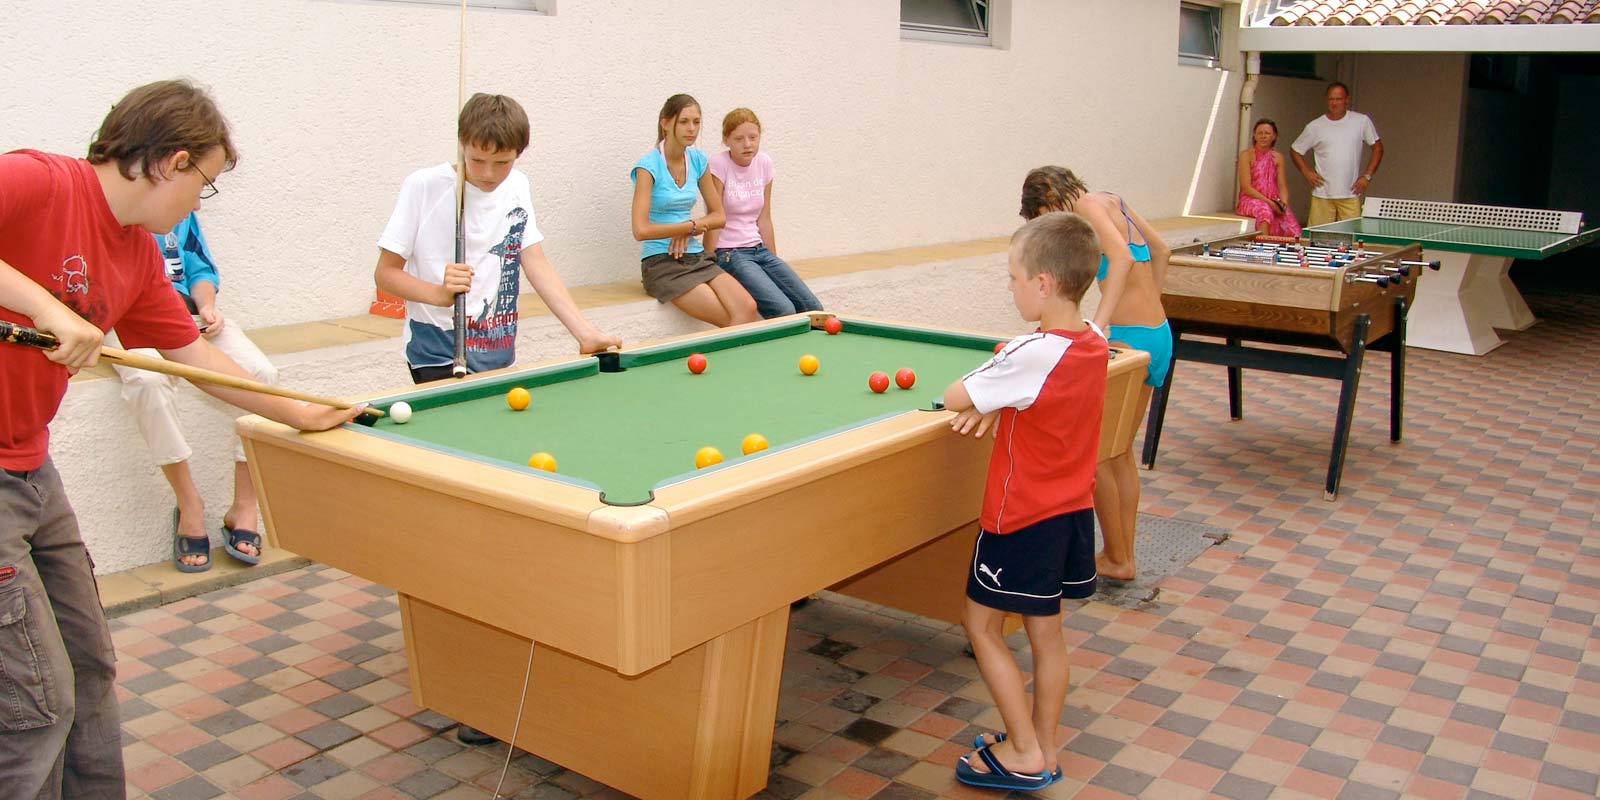 Children playing billiards in the camping playroom at Saint-Hilaire-de-Riez